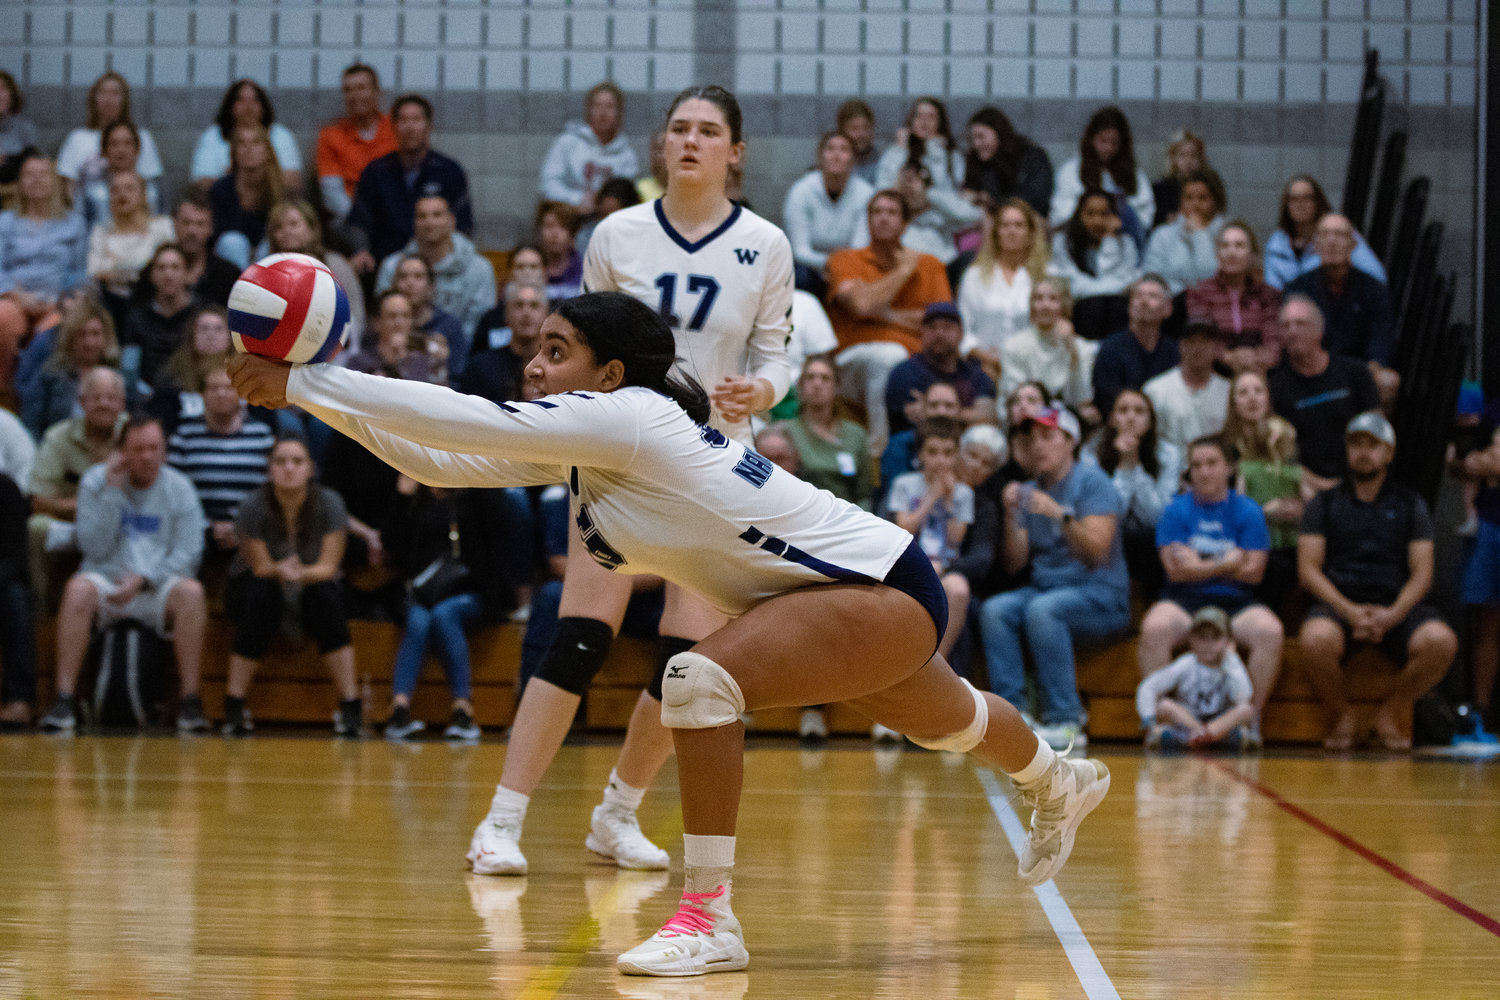 Yahely Del Rosario Gomez leans into a dig Monday in front of a packed house of Whalers fans against Blackstone Valley.